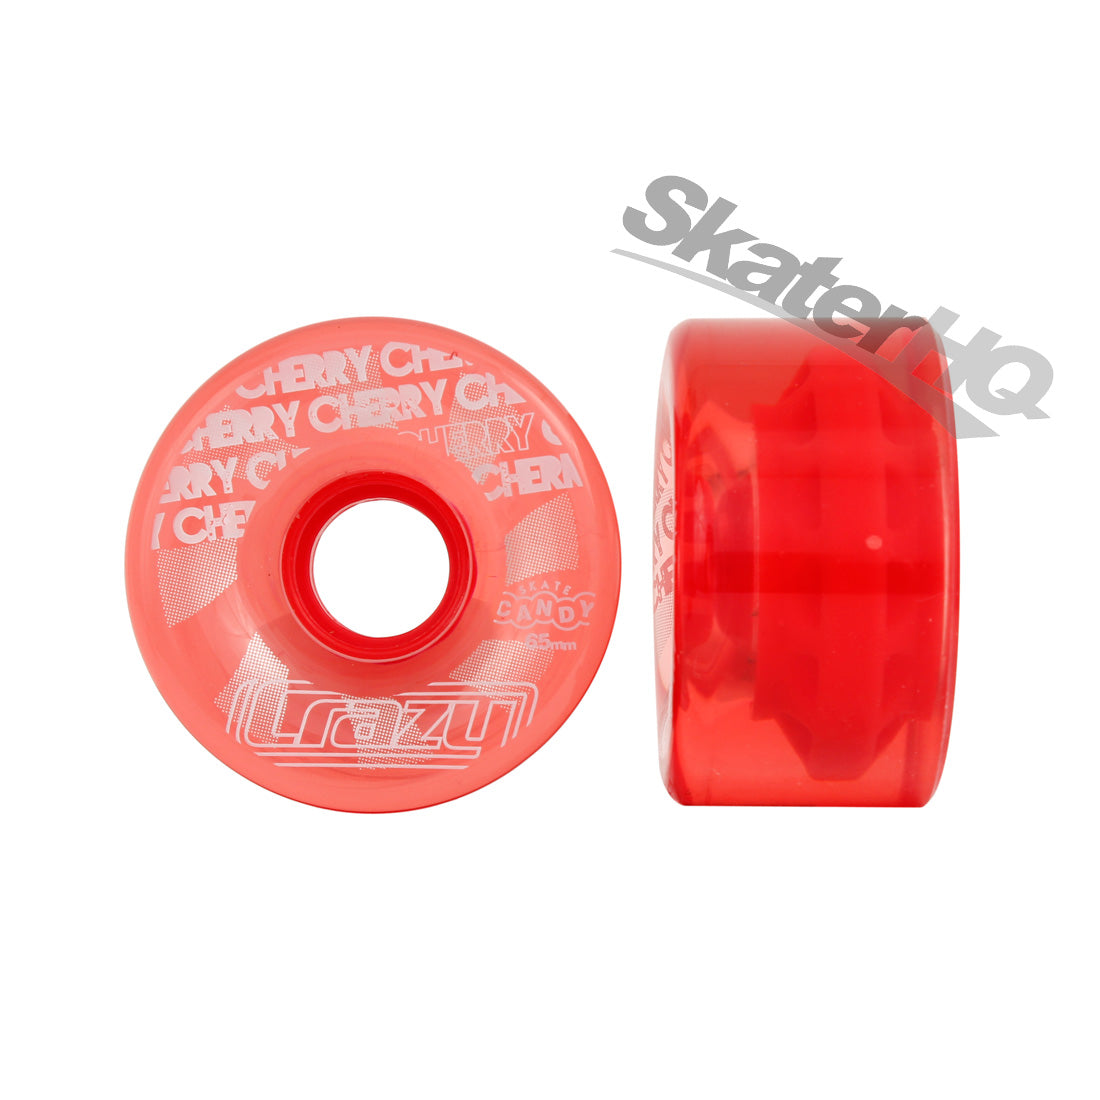 Crazy Candy Outdoor Wheels 65mm 78a 4pk Cherry Red Roller Skate Wheels